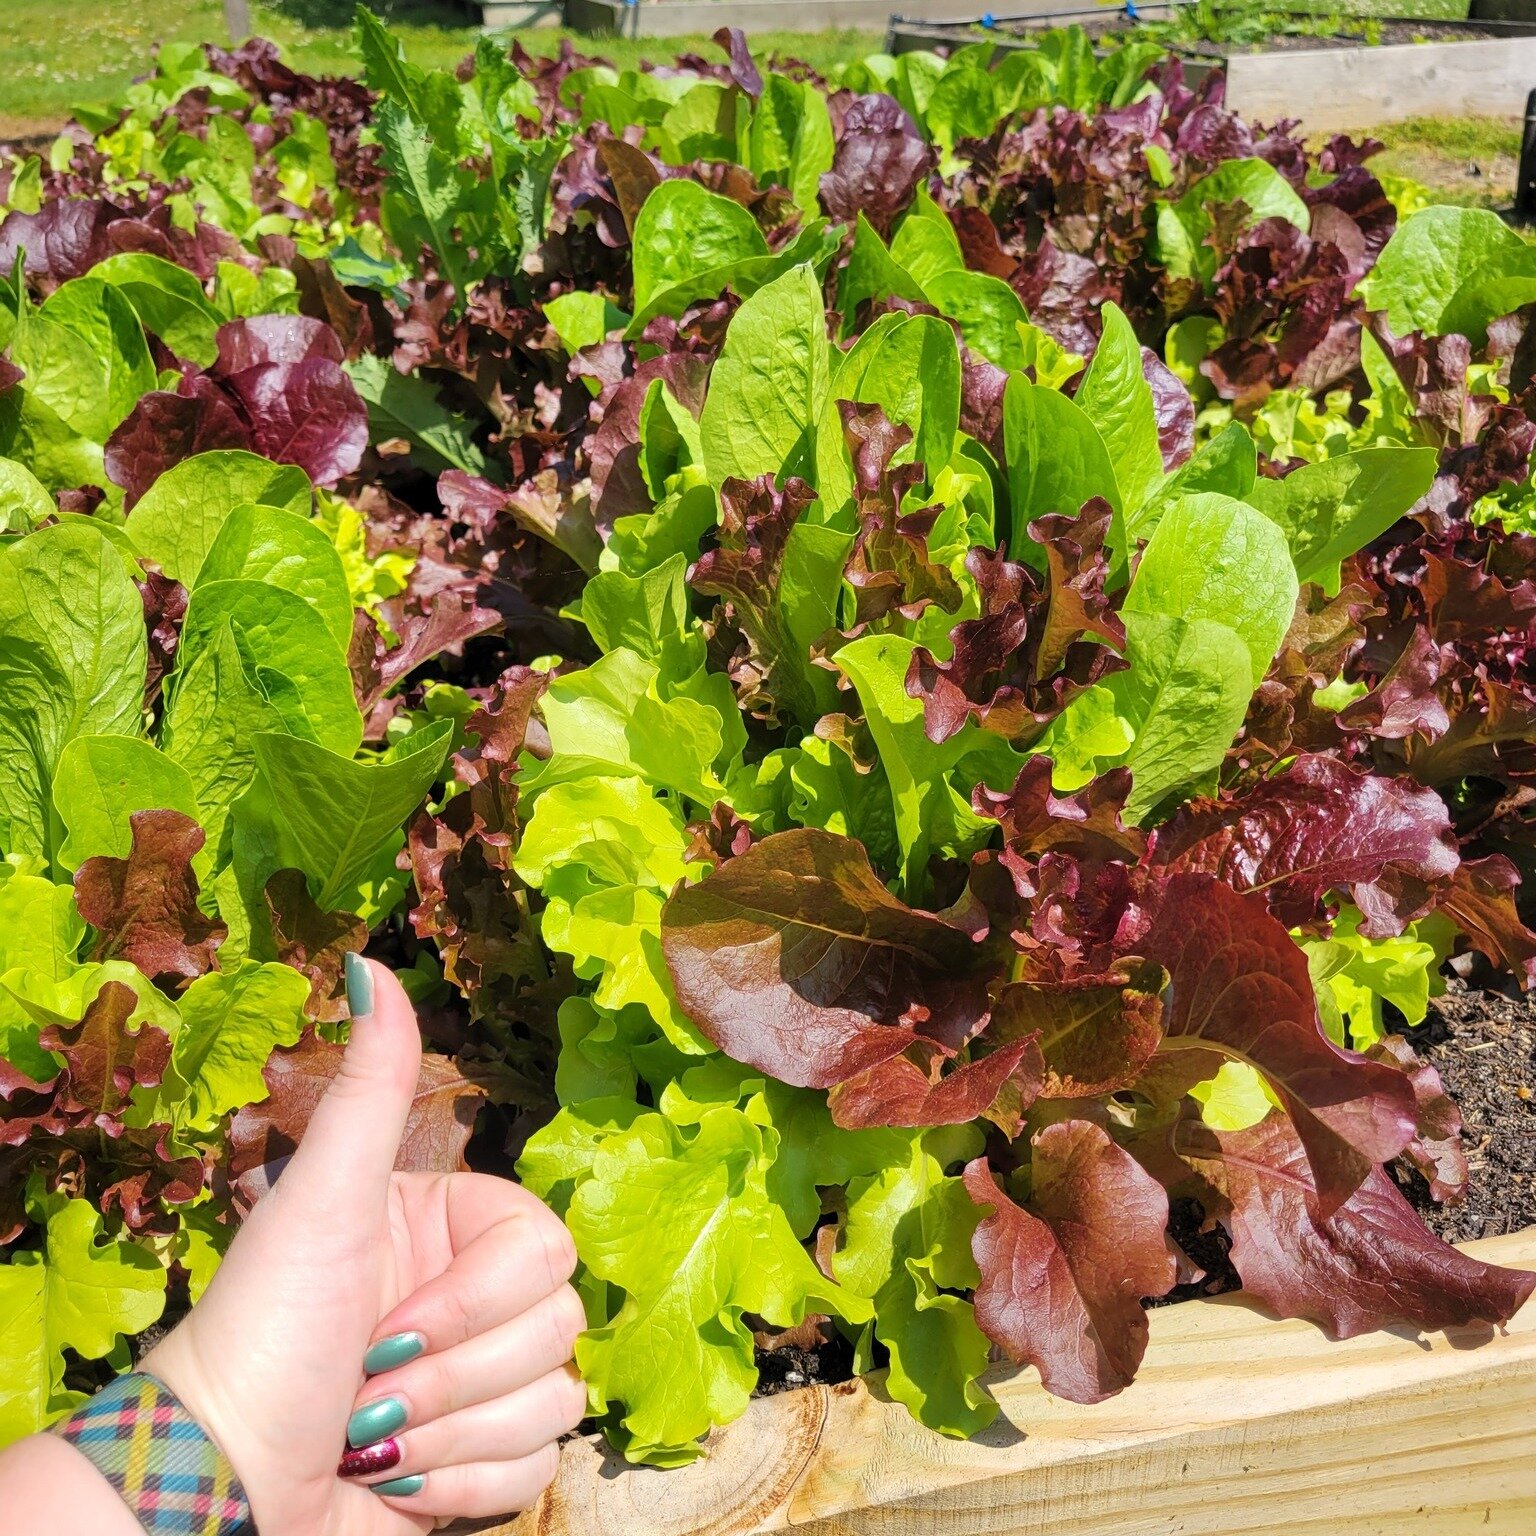 Some of our smallest gardeners are about to have a BIG harvest! Congratulations to Indian River SD's Early Learning Center for their beautiful lettuce and radishes! We can't wait to see all the kiddos munchin'!

A big thank you to the #longwoodfounda